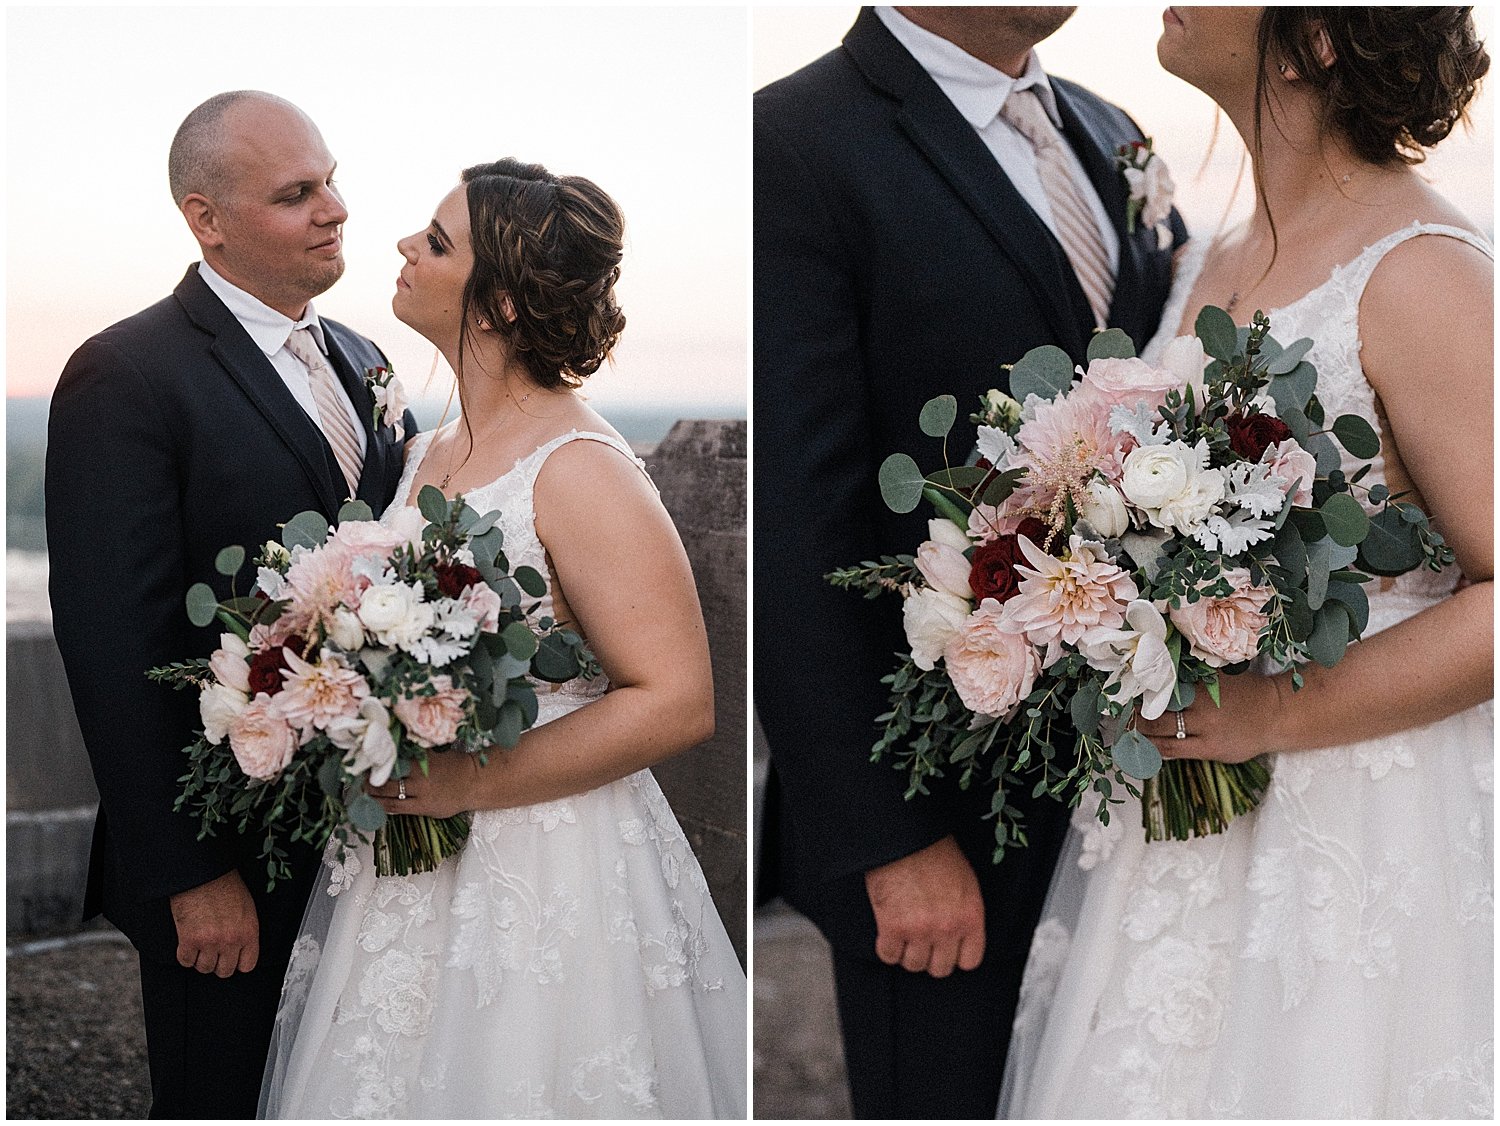 Rooftop Wedding Portraits | The Grande Hall at Liberty Tower